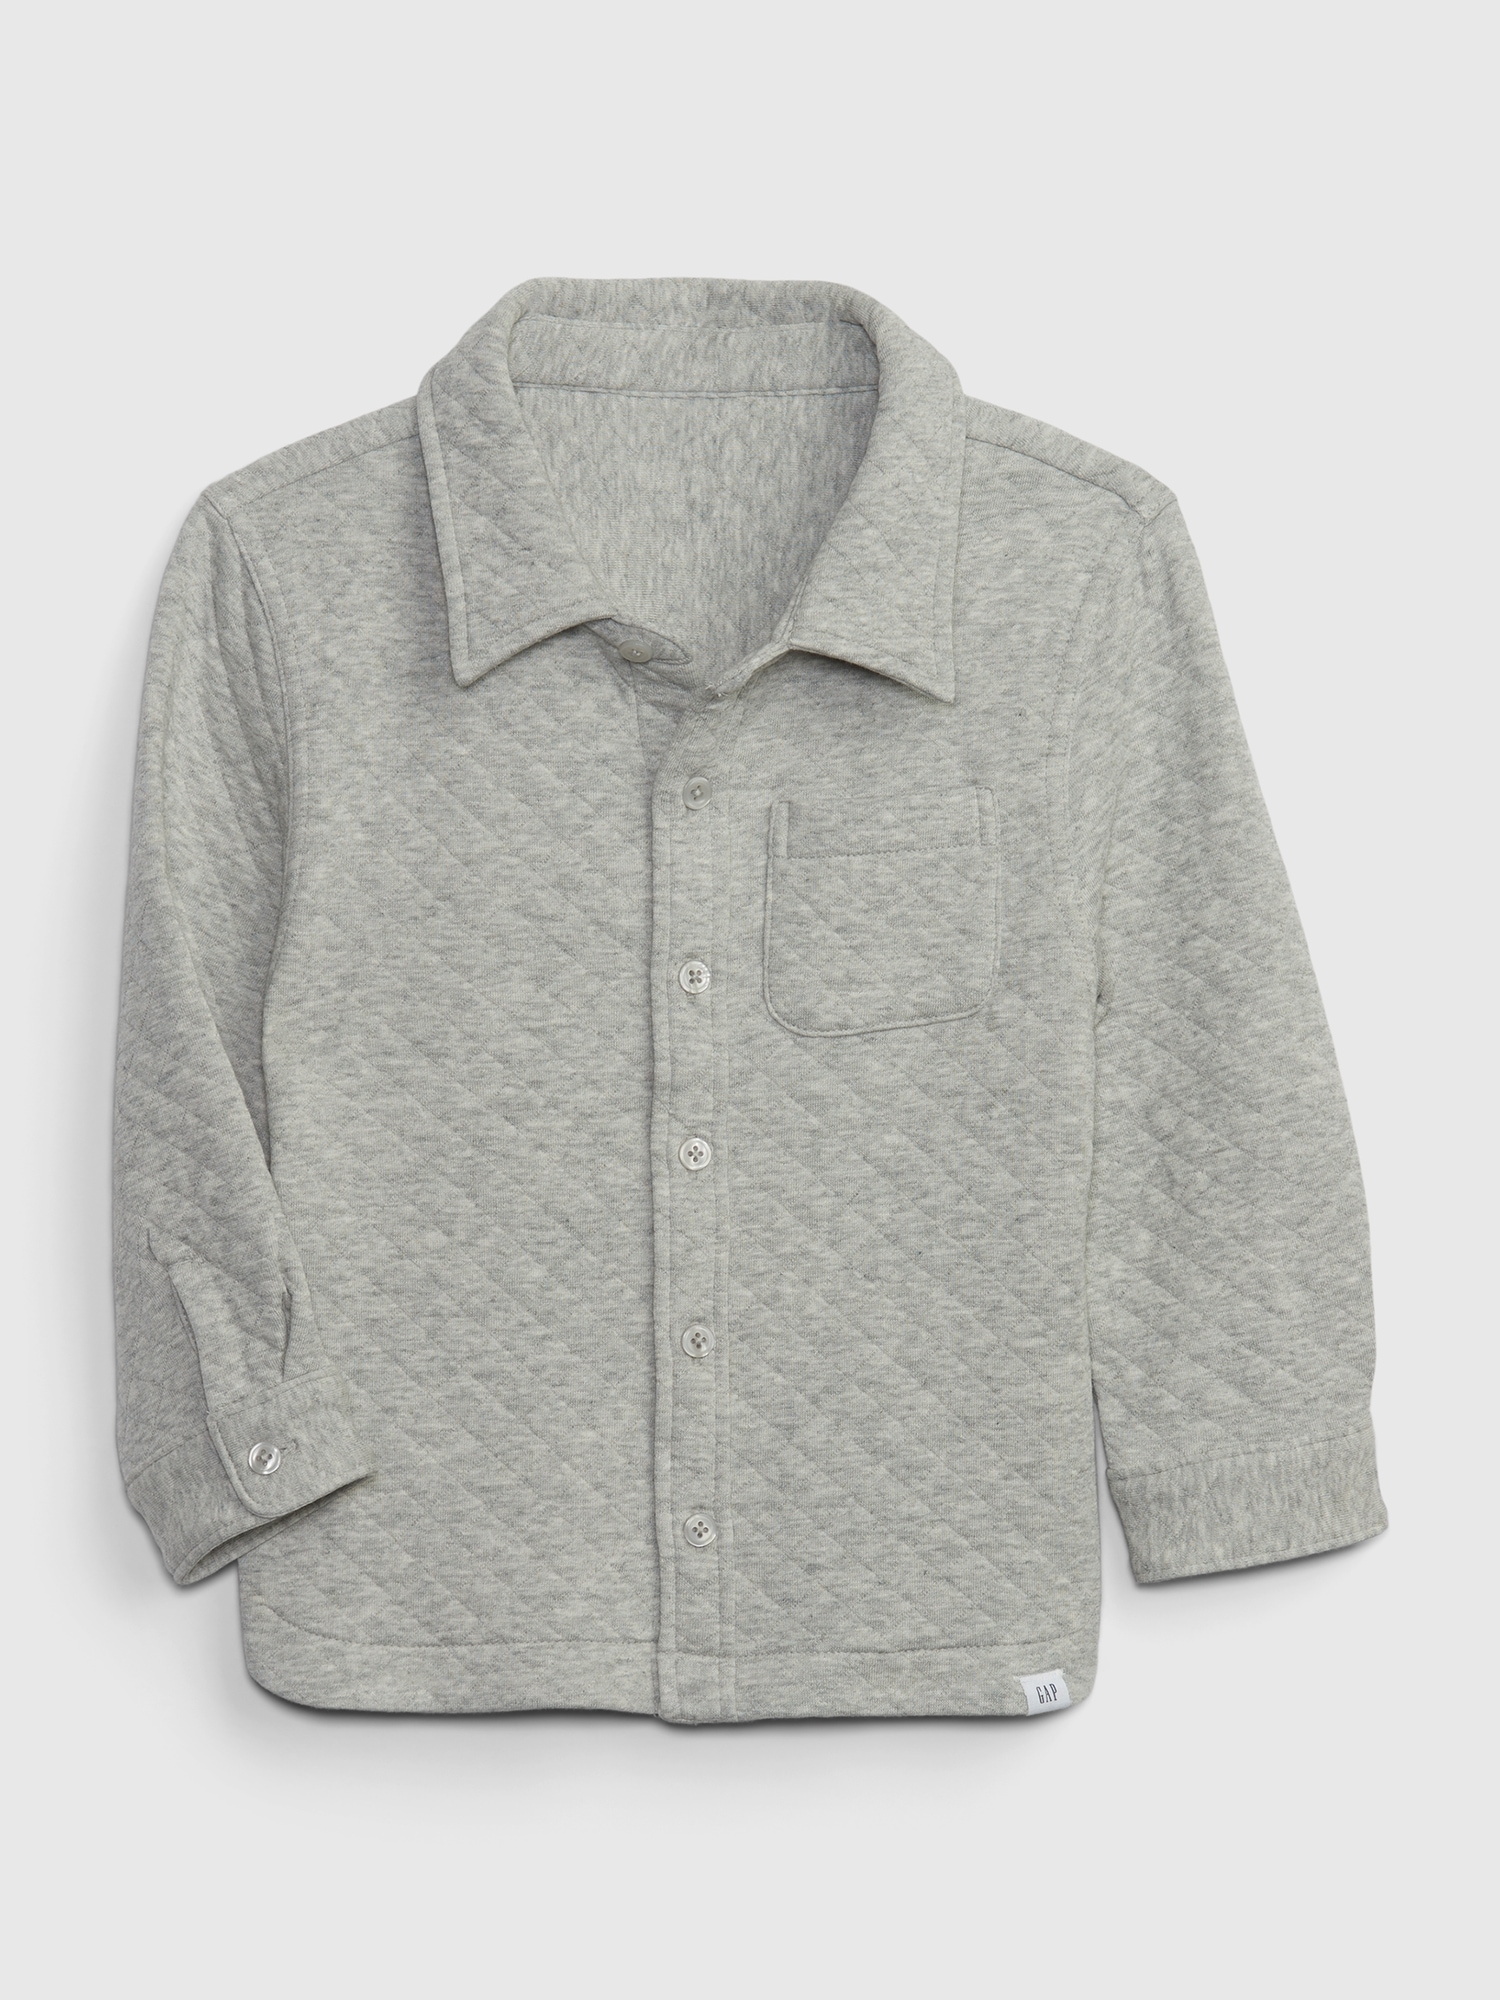 GAP Kids' quilted jacket - Boys